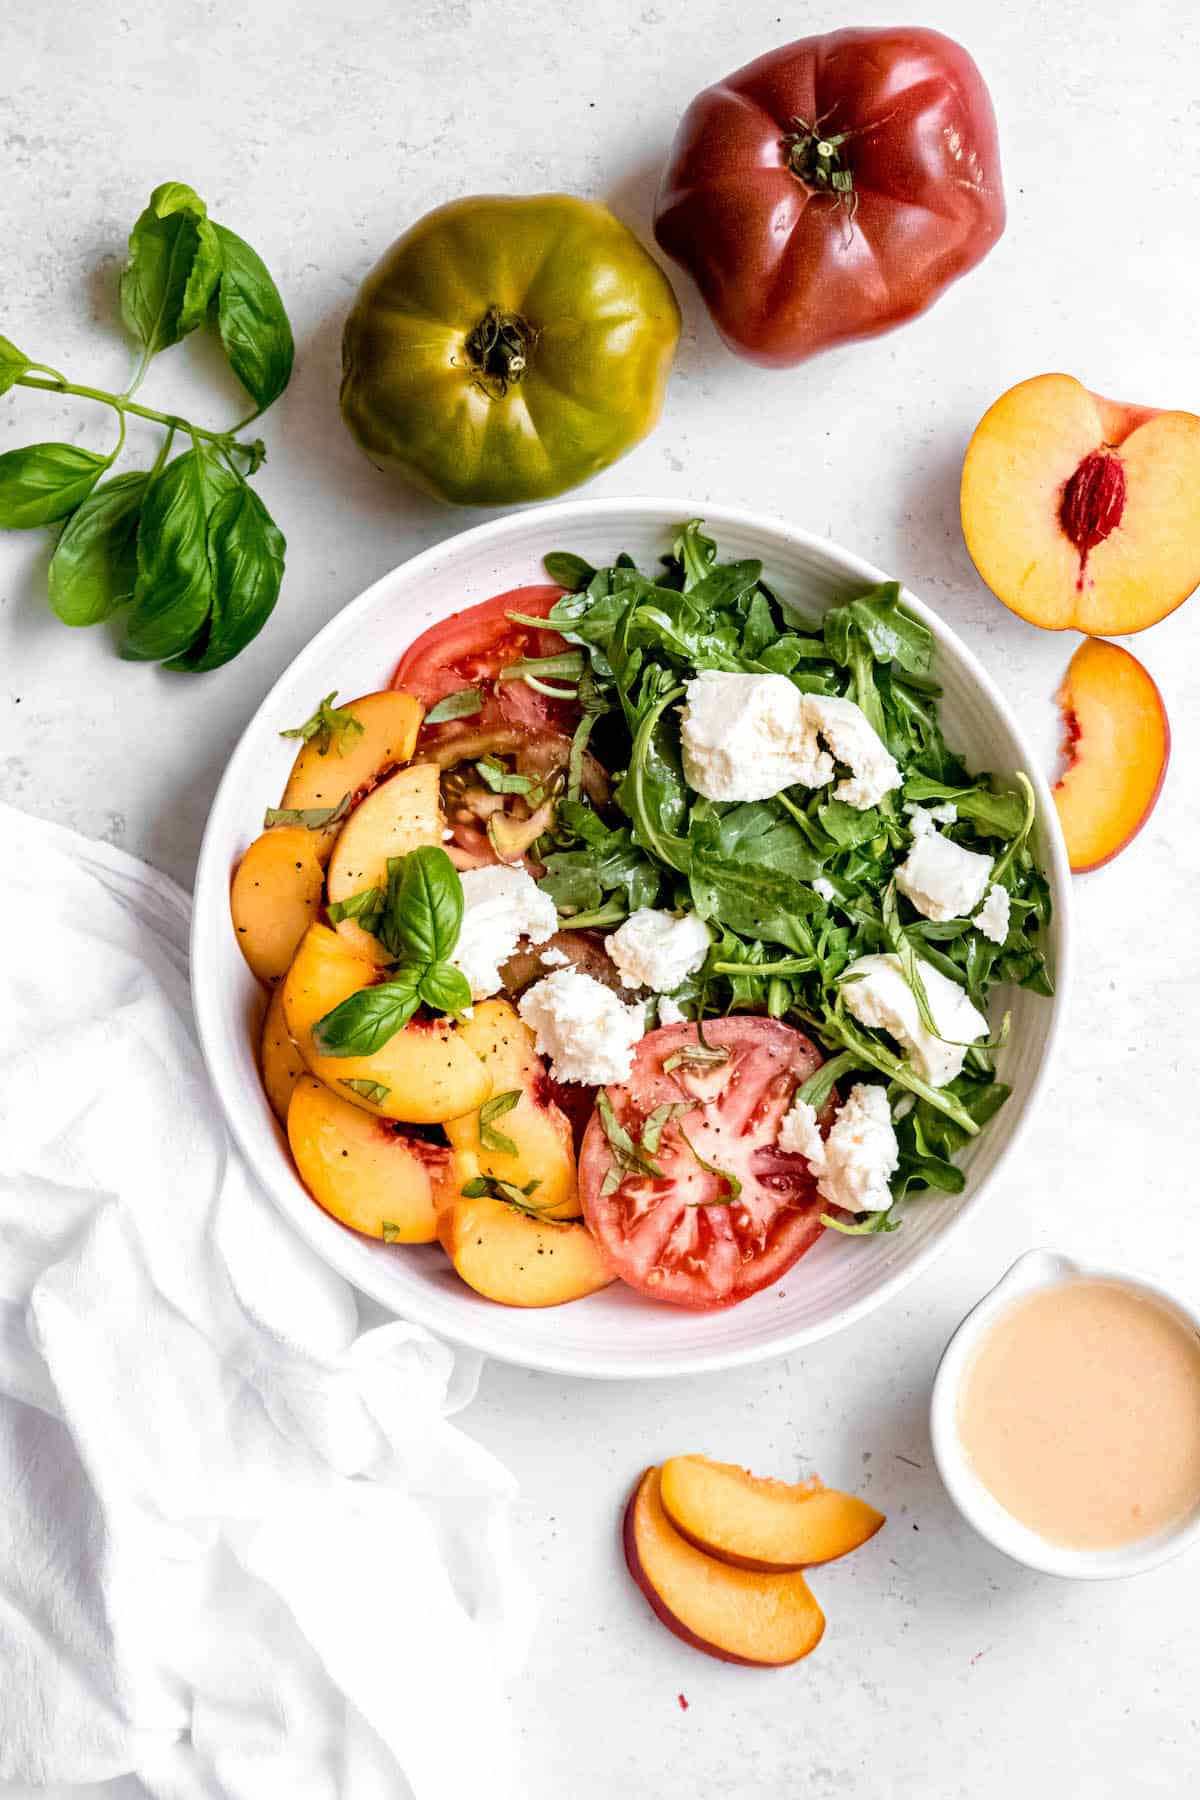 flat lay shot of a tomato peach caprese salad with torn burrata and freshly made white balsamic vinaigrette to the side.